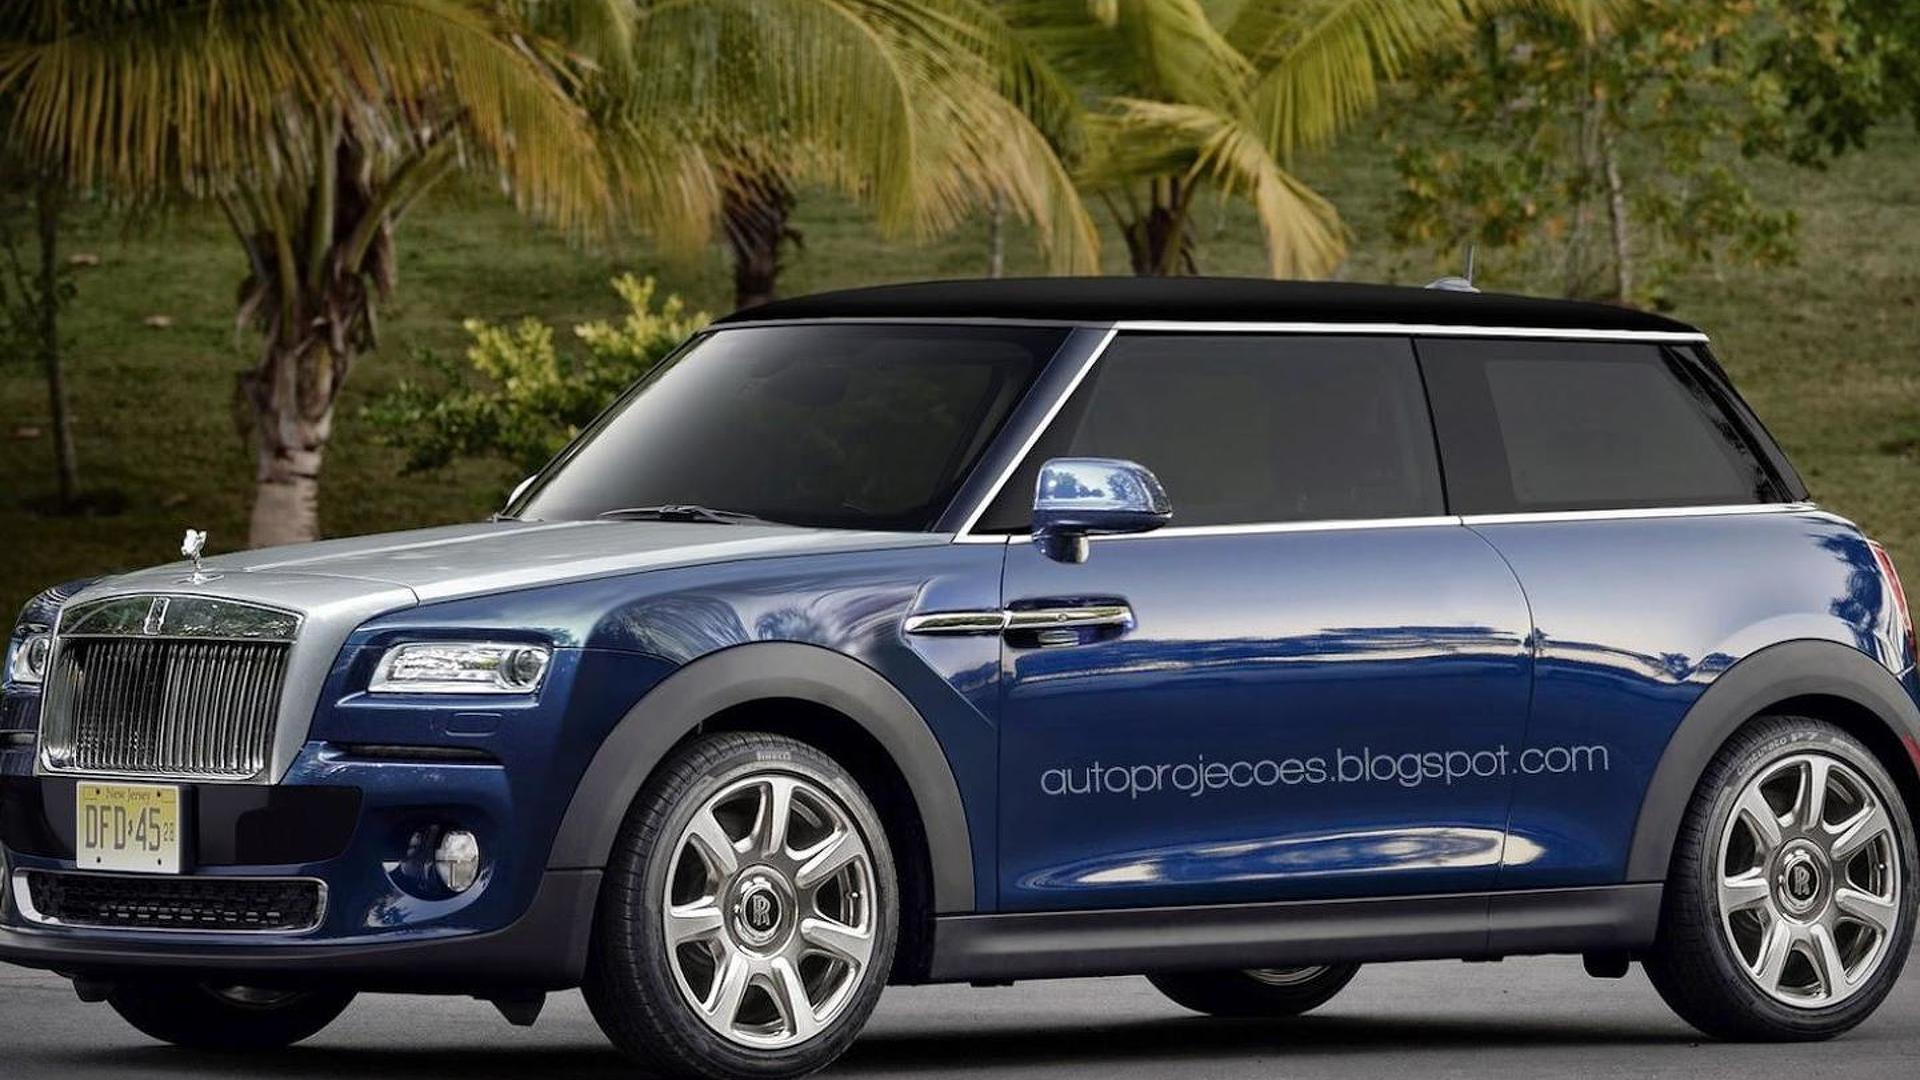 Rolls Royce Says They Will Never Launch A Small Model; SUV To Cost